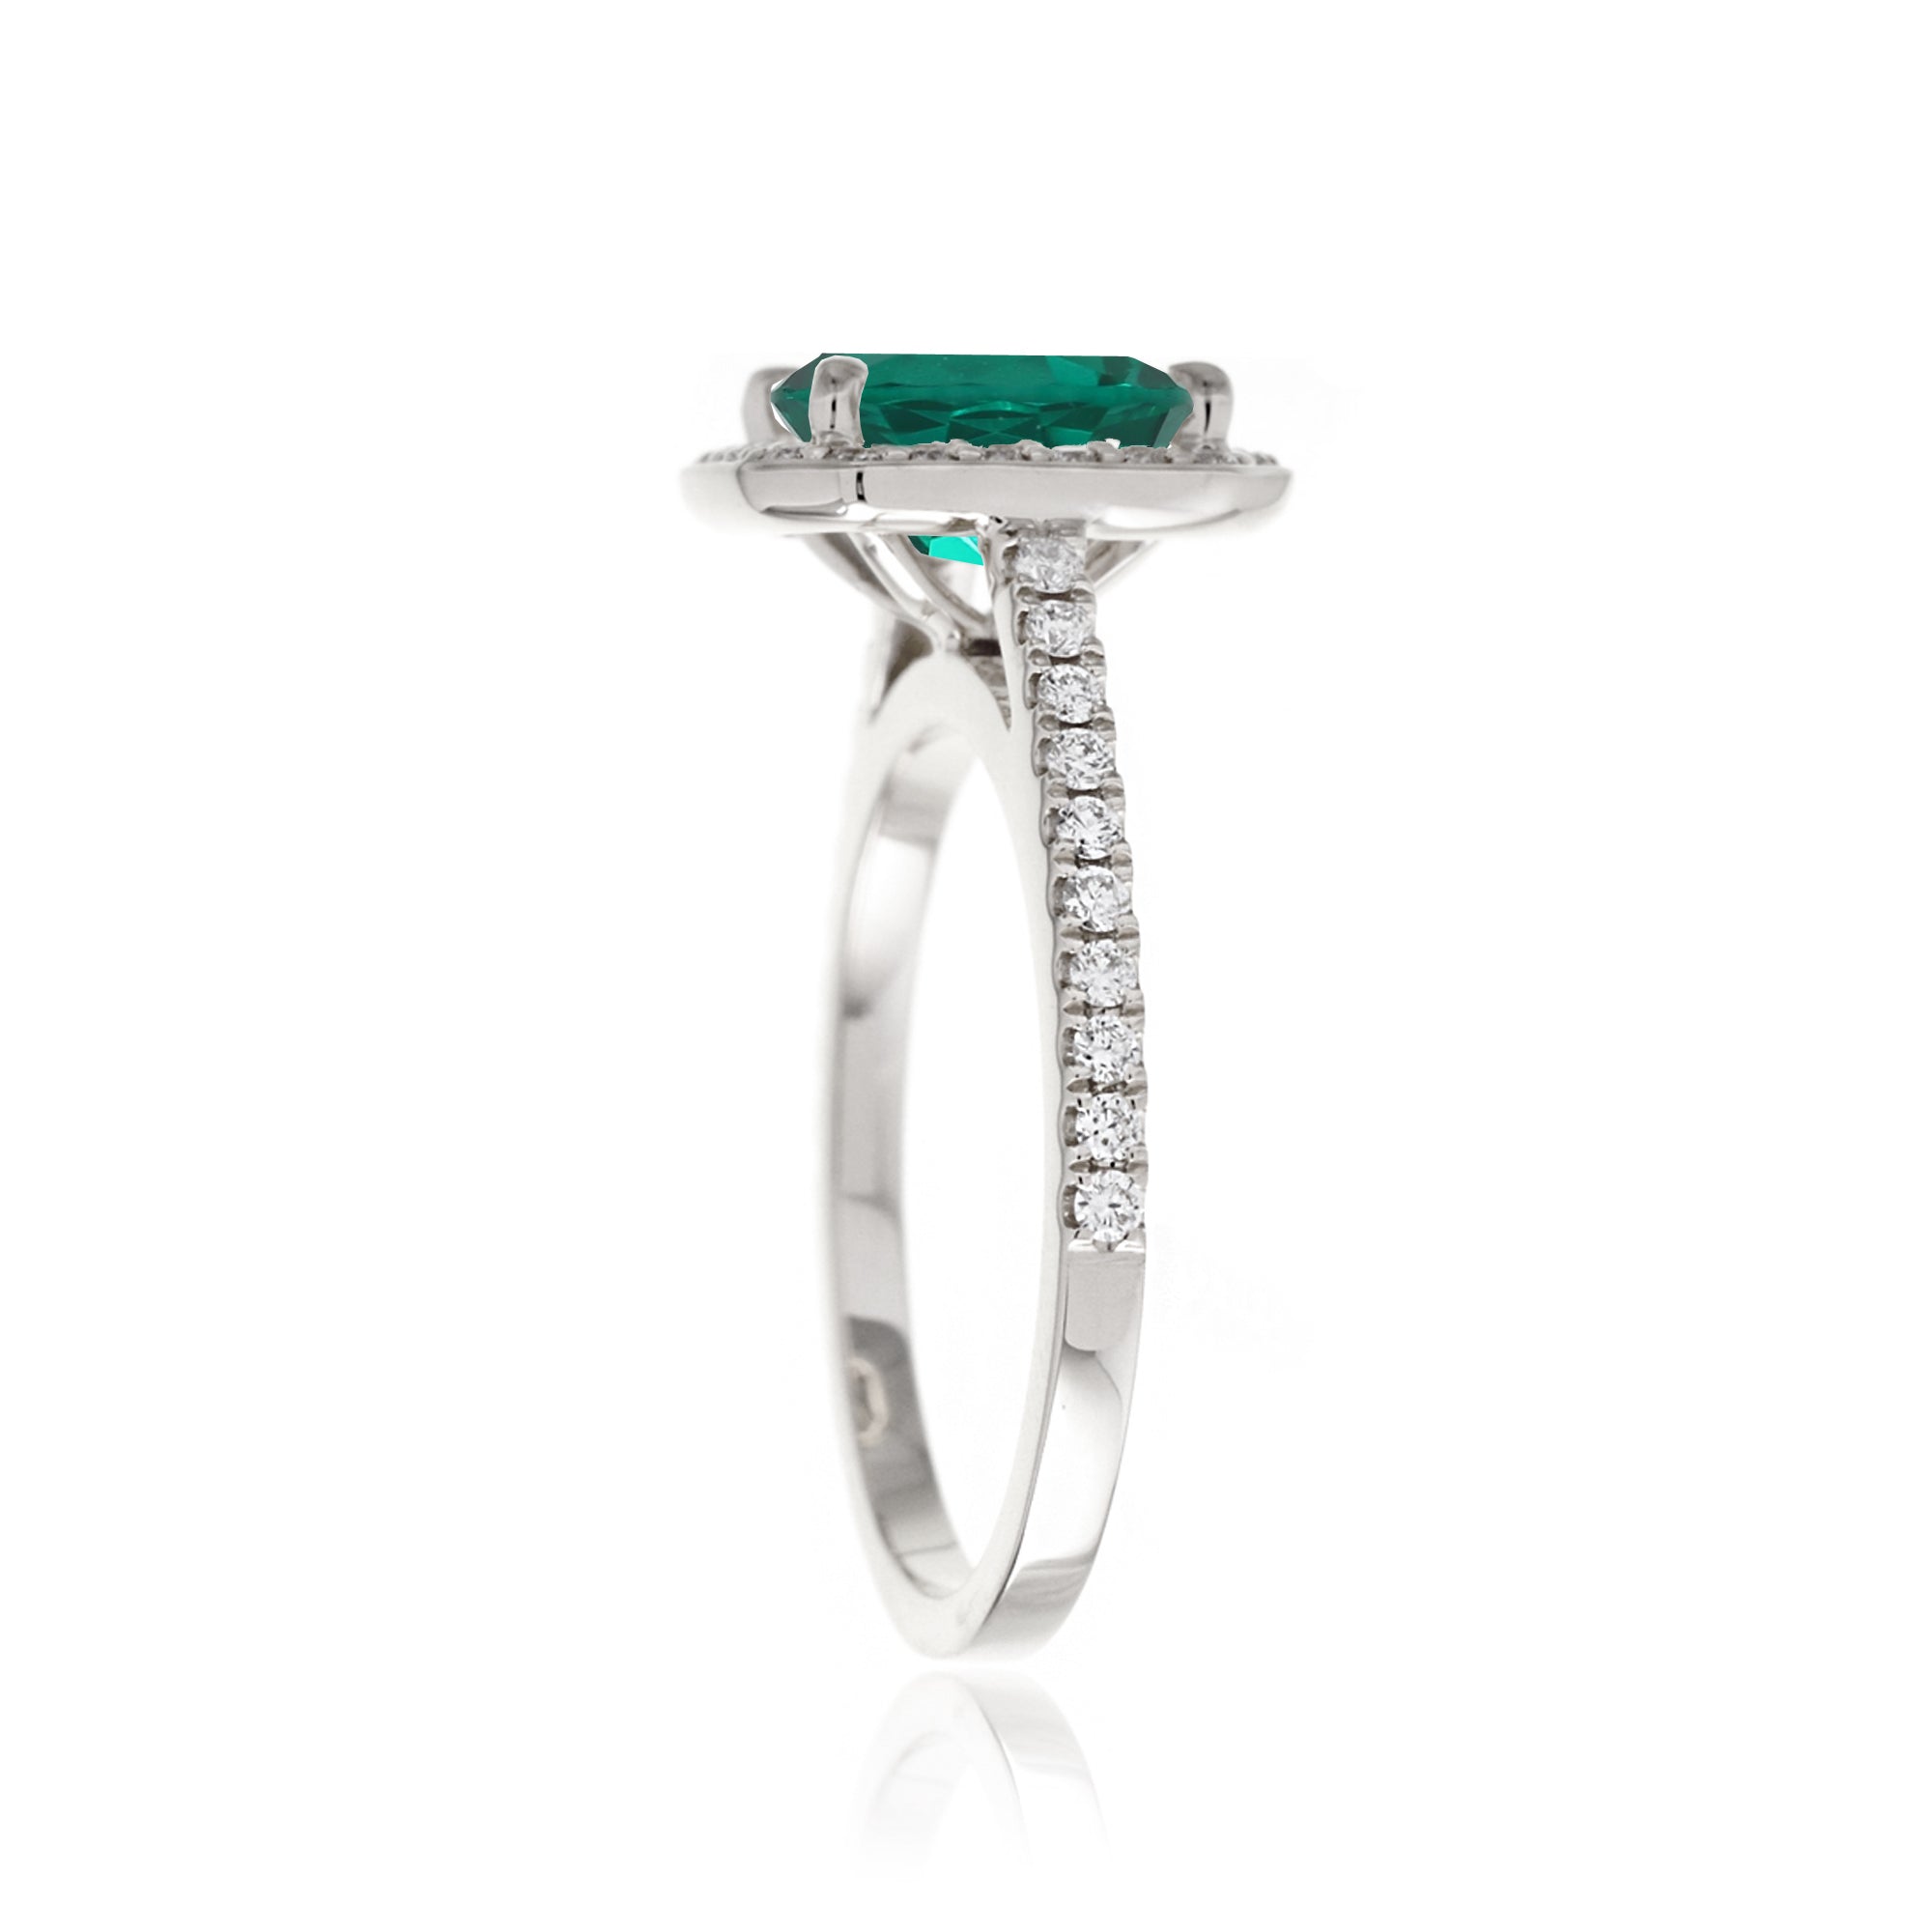 Cushion lab-grown emerald diamond halo cathedral engagement ring - the Steffy white gold